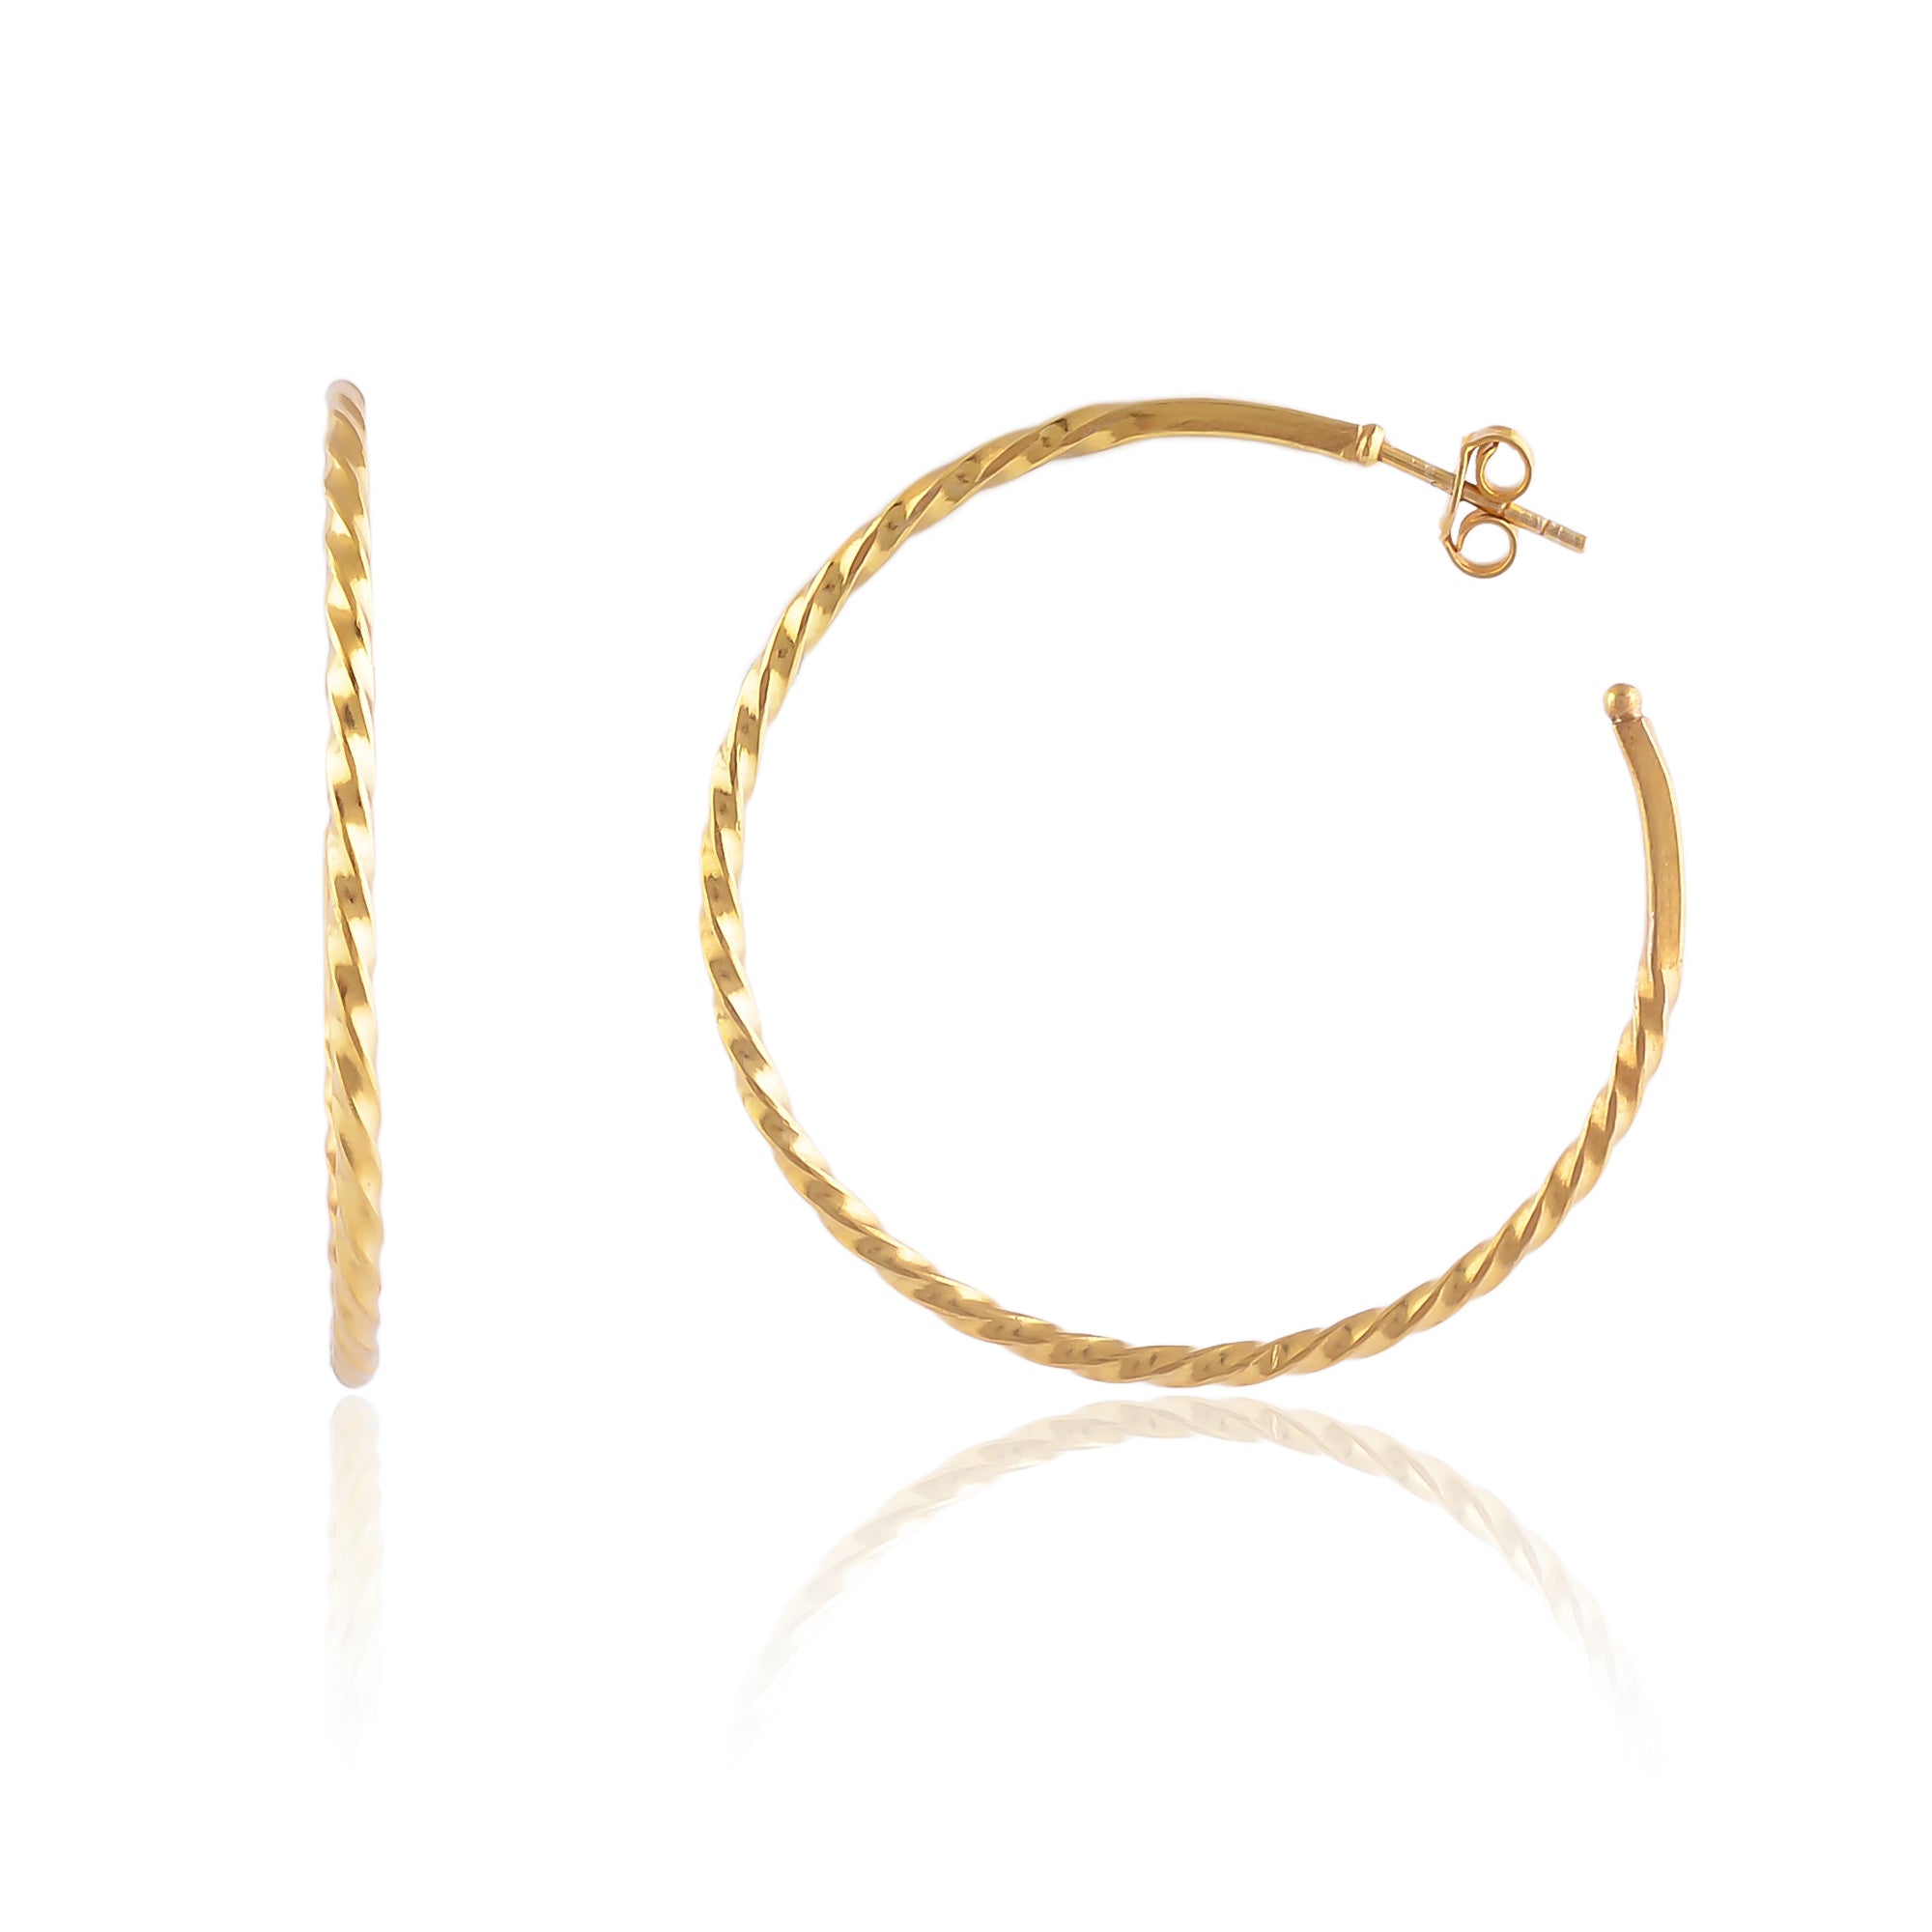 Buy Hand Crafted Silver Gold Plated Twisted Hoop